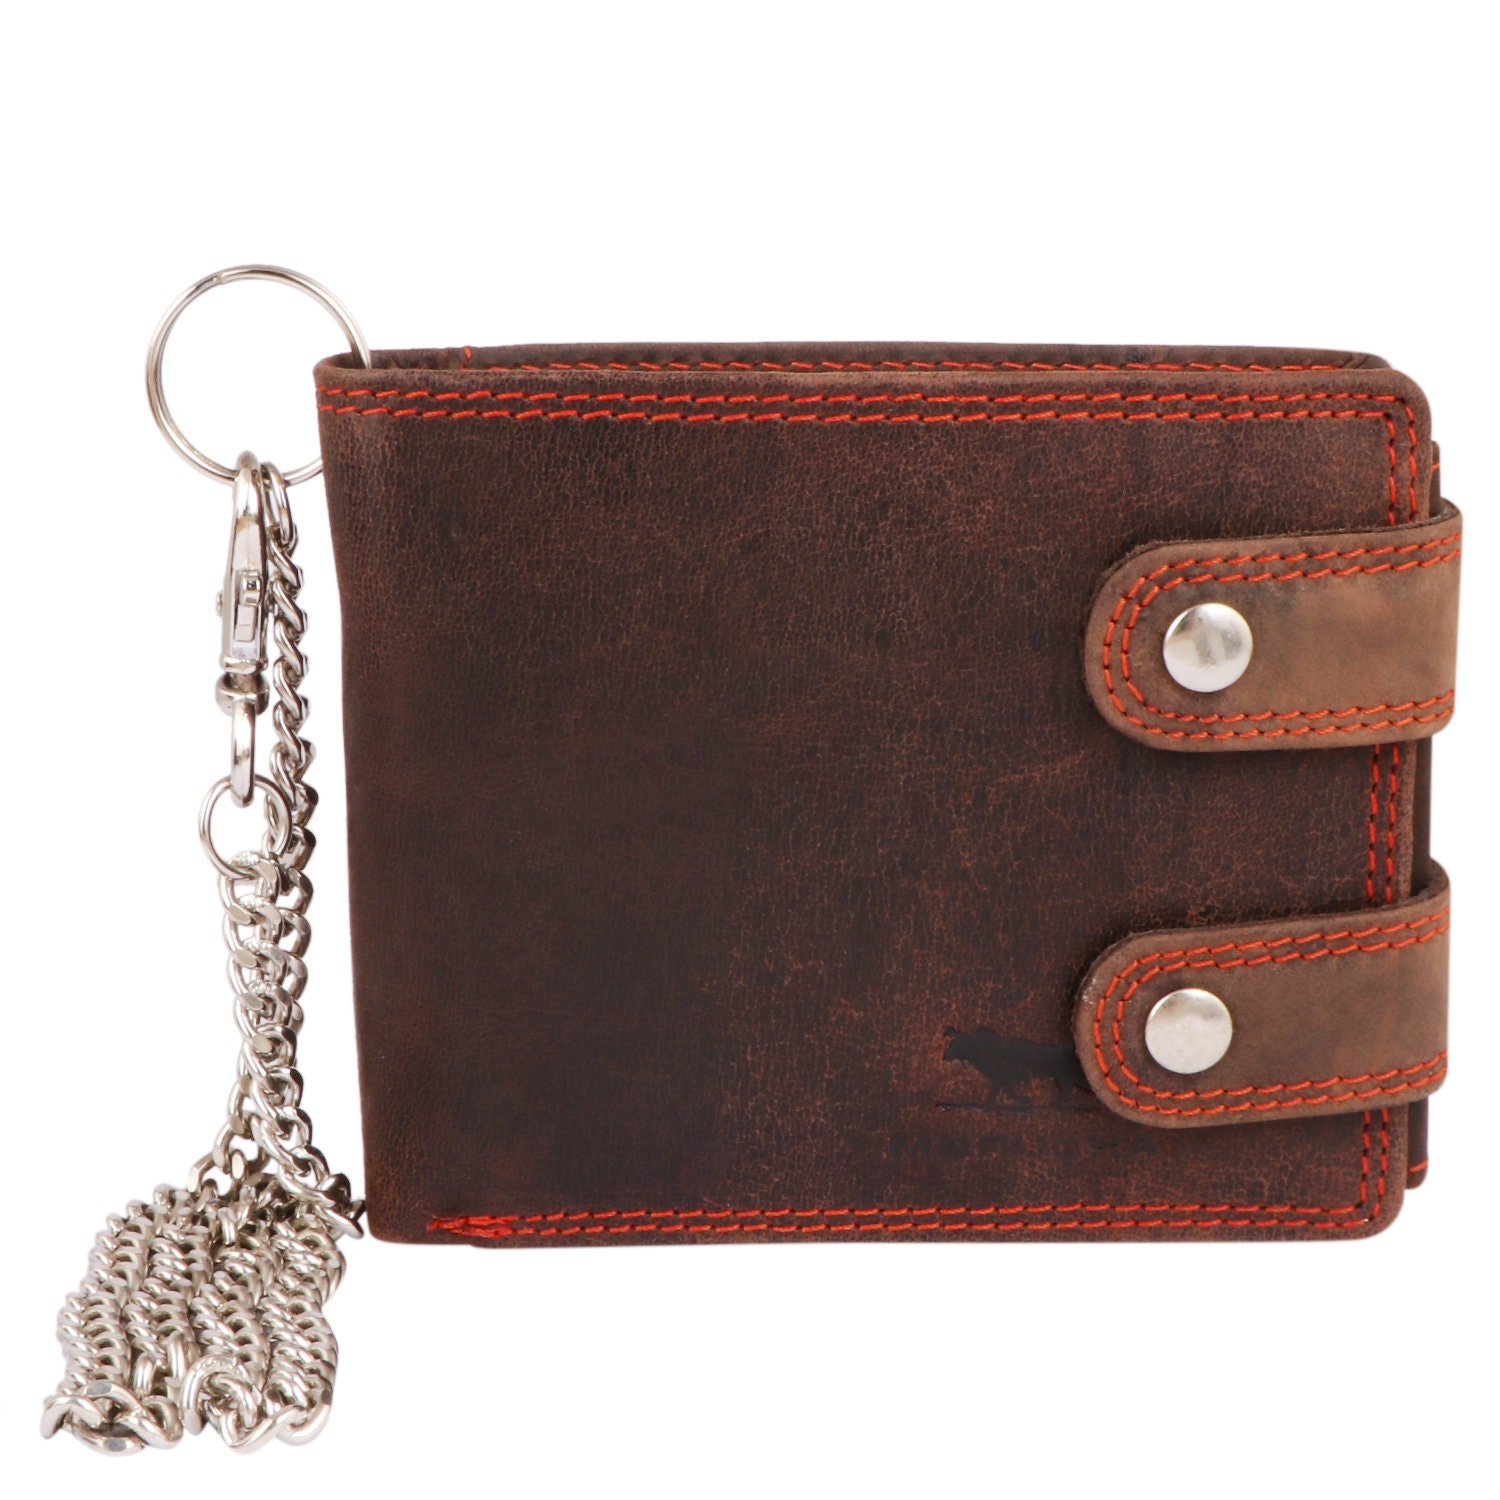 Handmade Sterling Silver Wallet Chain and Horsehide Wallet